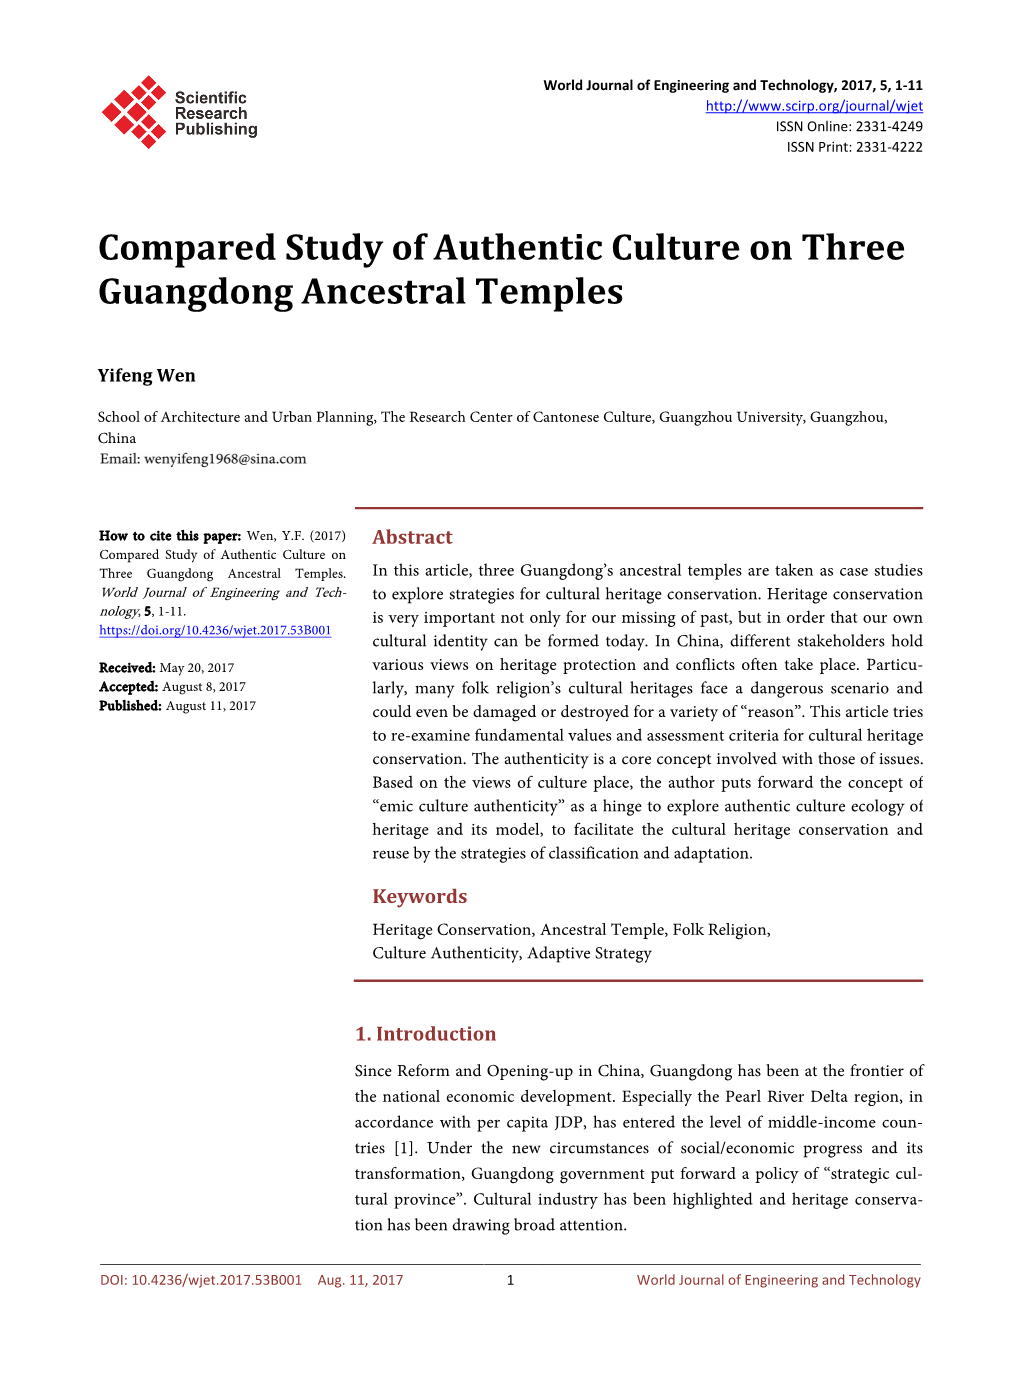 Compared Study of Authentic Culture on Three Guangdong Ancestral Temples